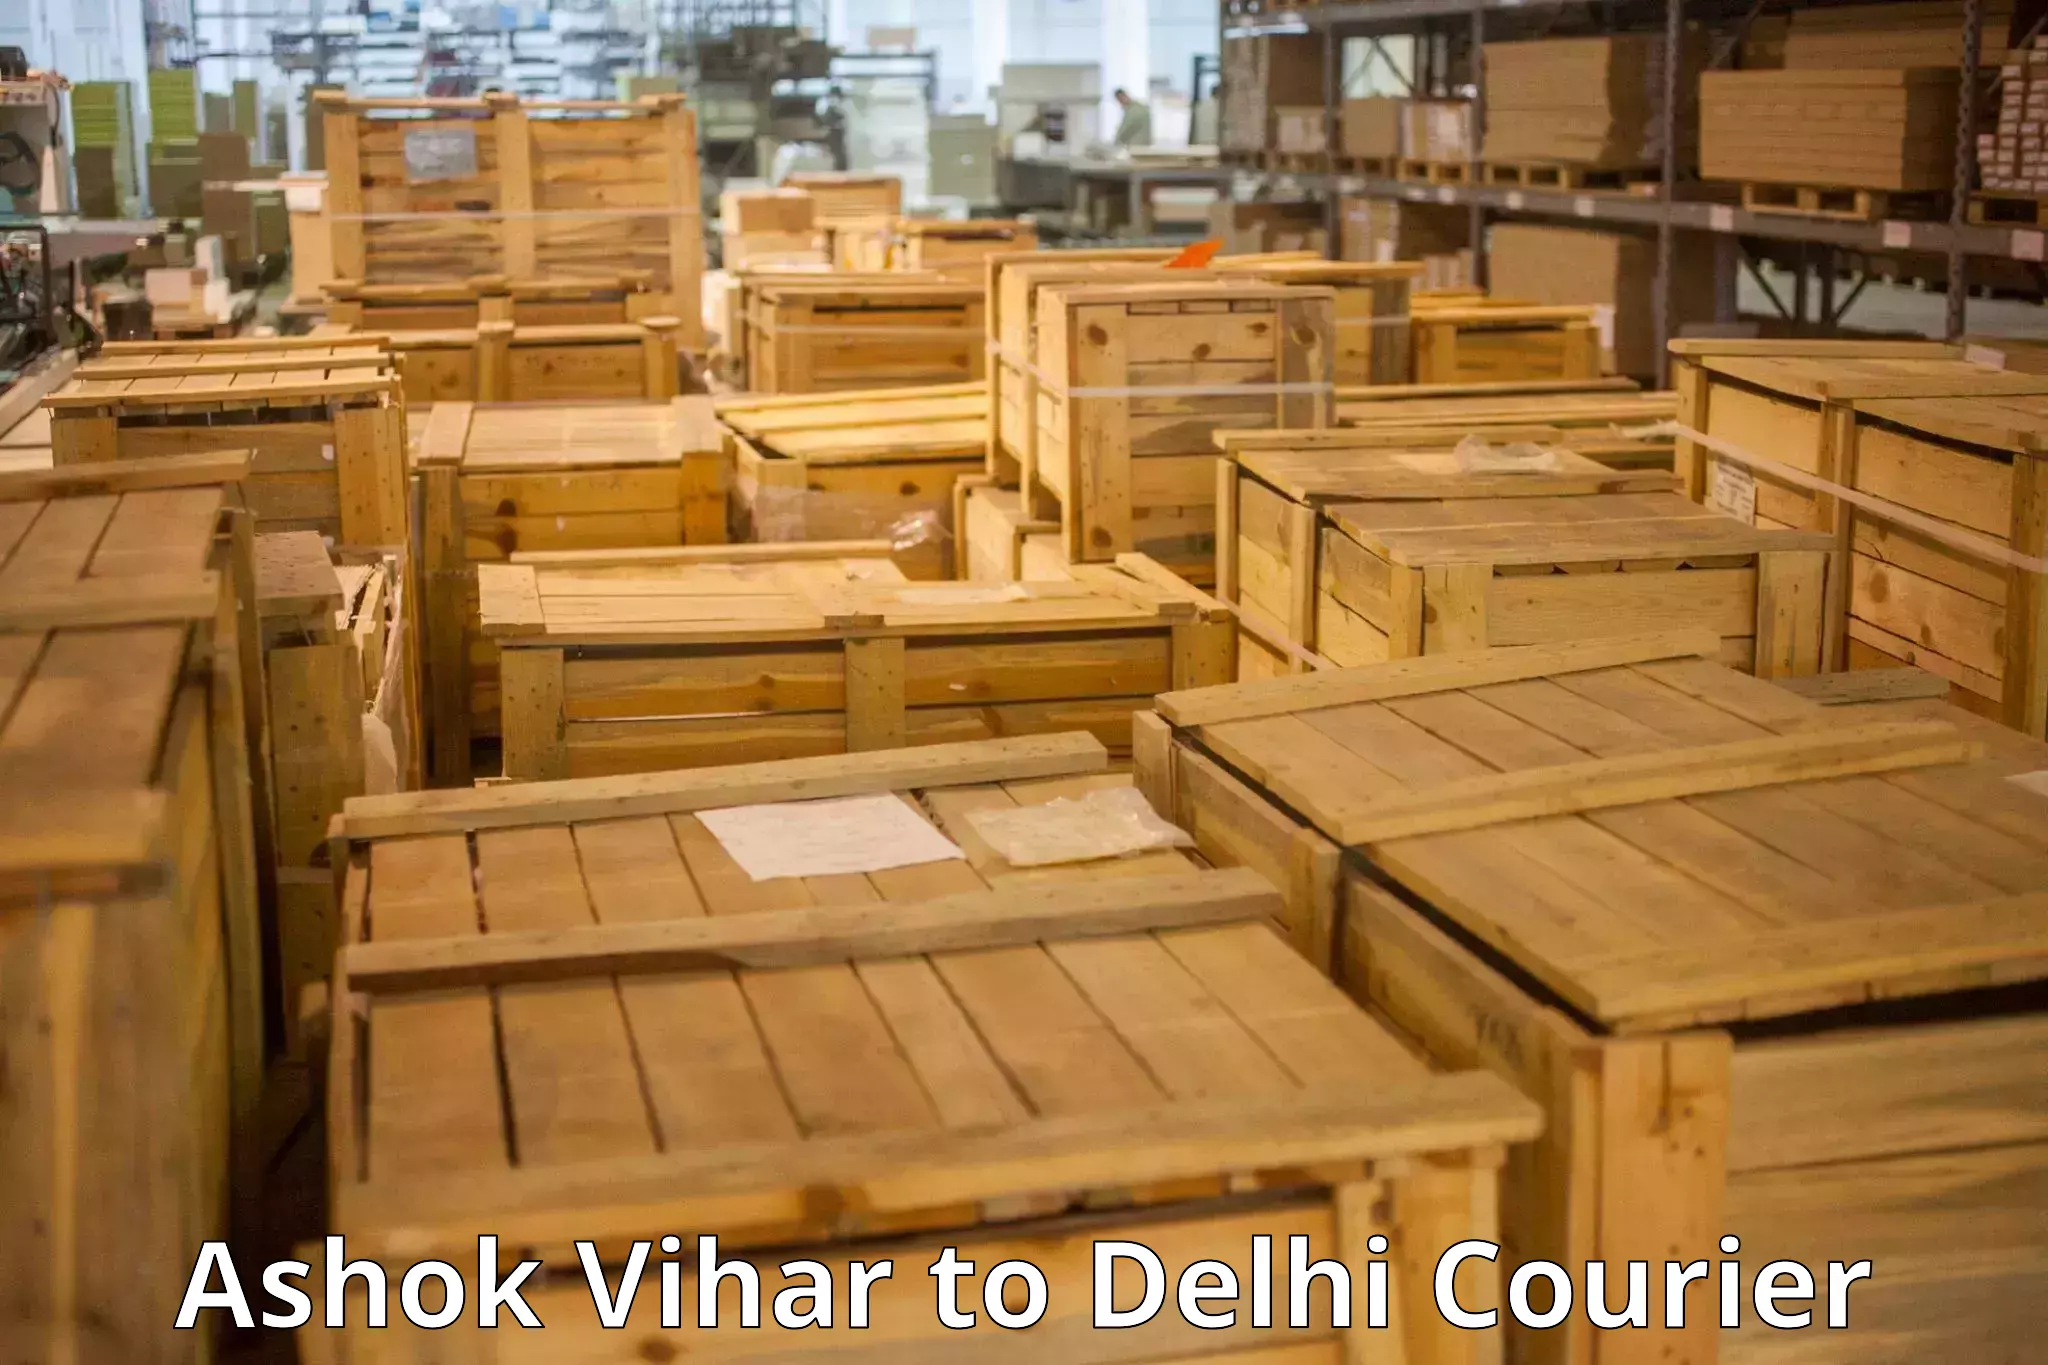 Personal effects shipping in Ashok Vihar to NCR